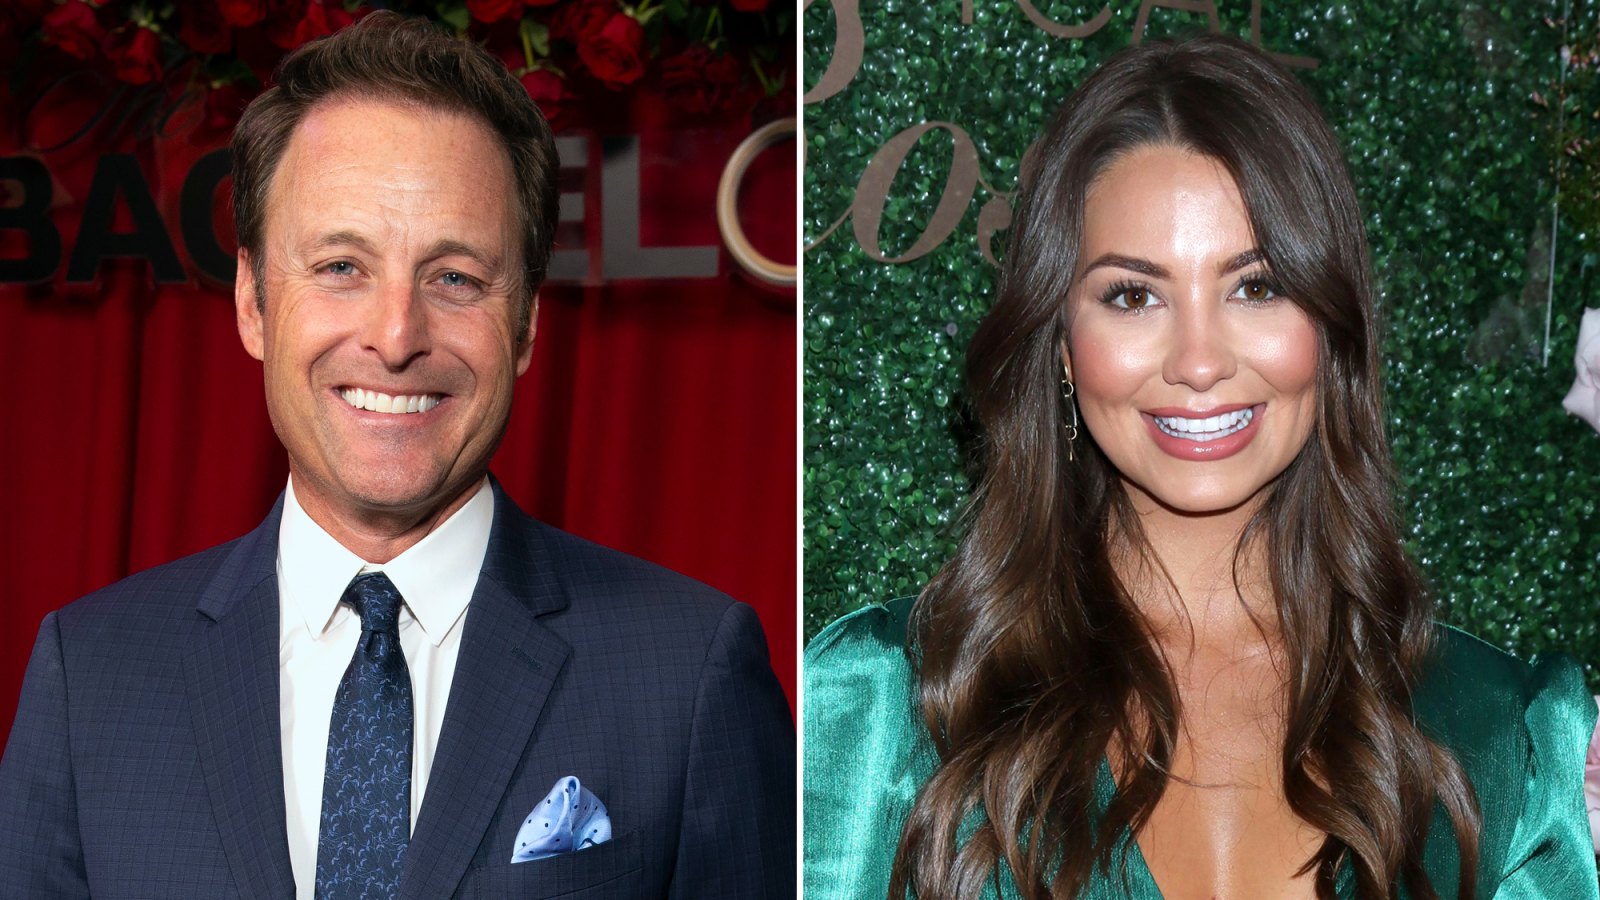 Chris Harrison Reveals He Spoke to Kelley Flanagan After She Claims She Was Locked in a Closet on 'The Bachelor'